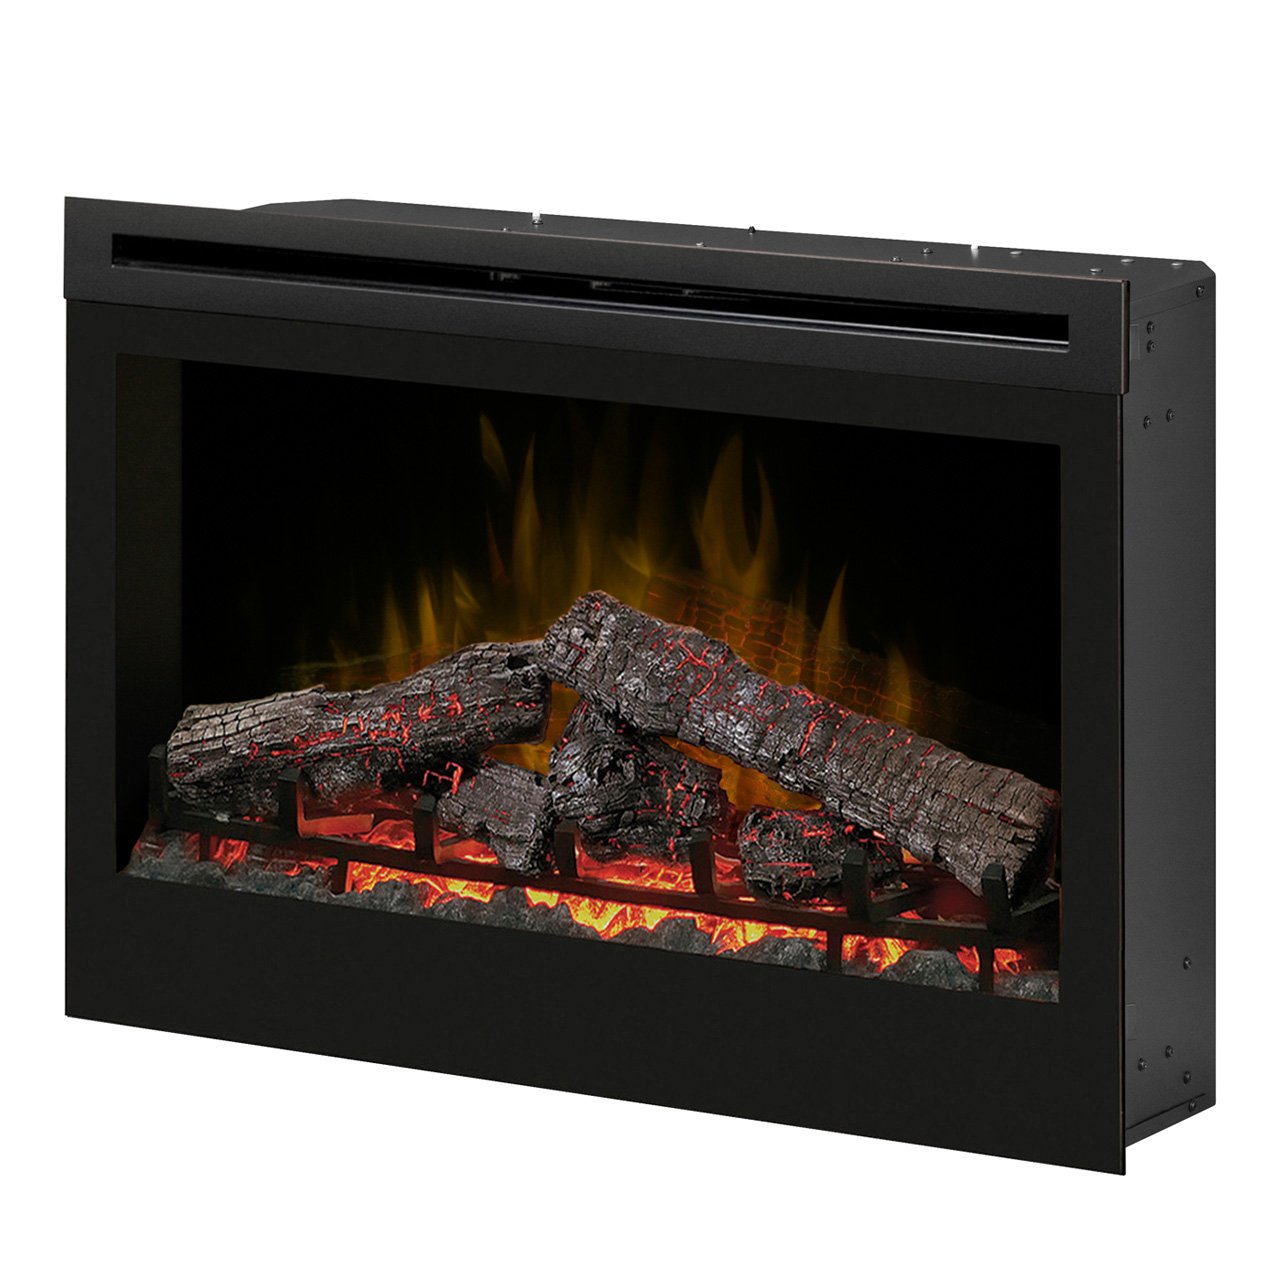 Electric Fireplaces Direct Outlet Luxury Dimplex Df3033st 33 Inch Self Trimming Electric Fireplace Insert